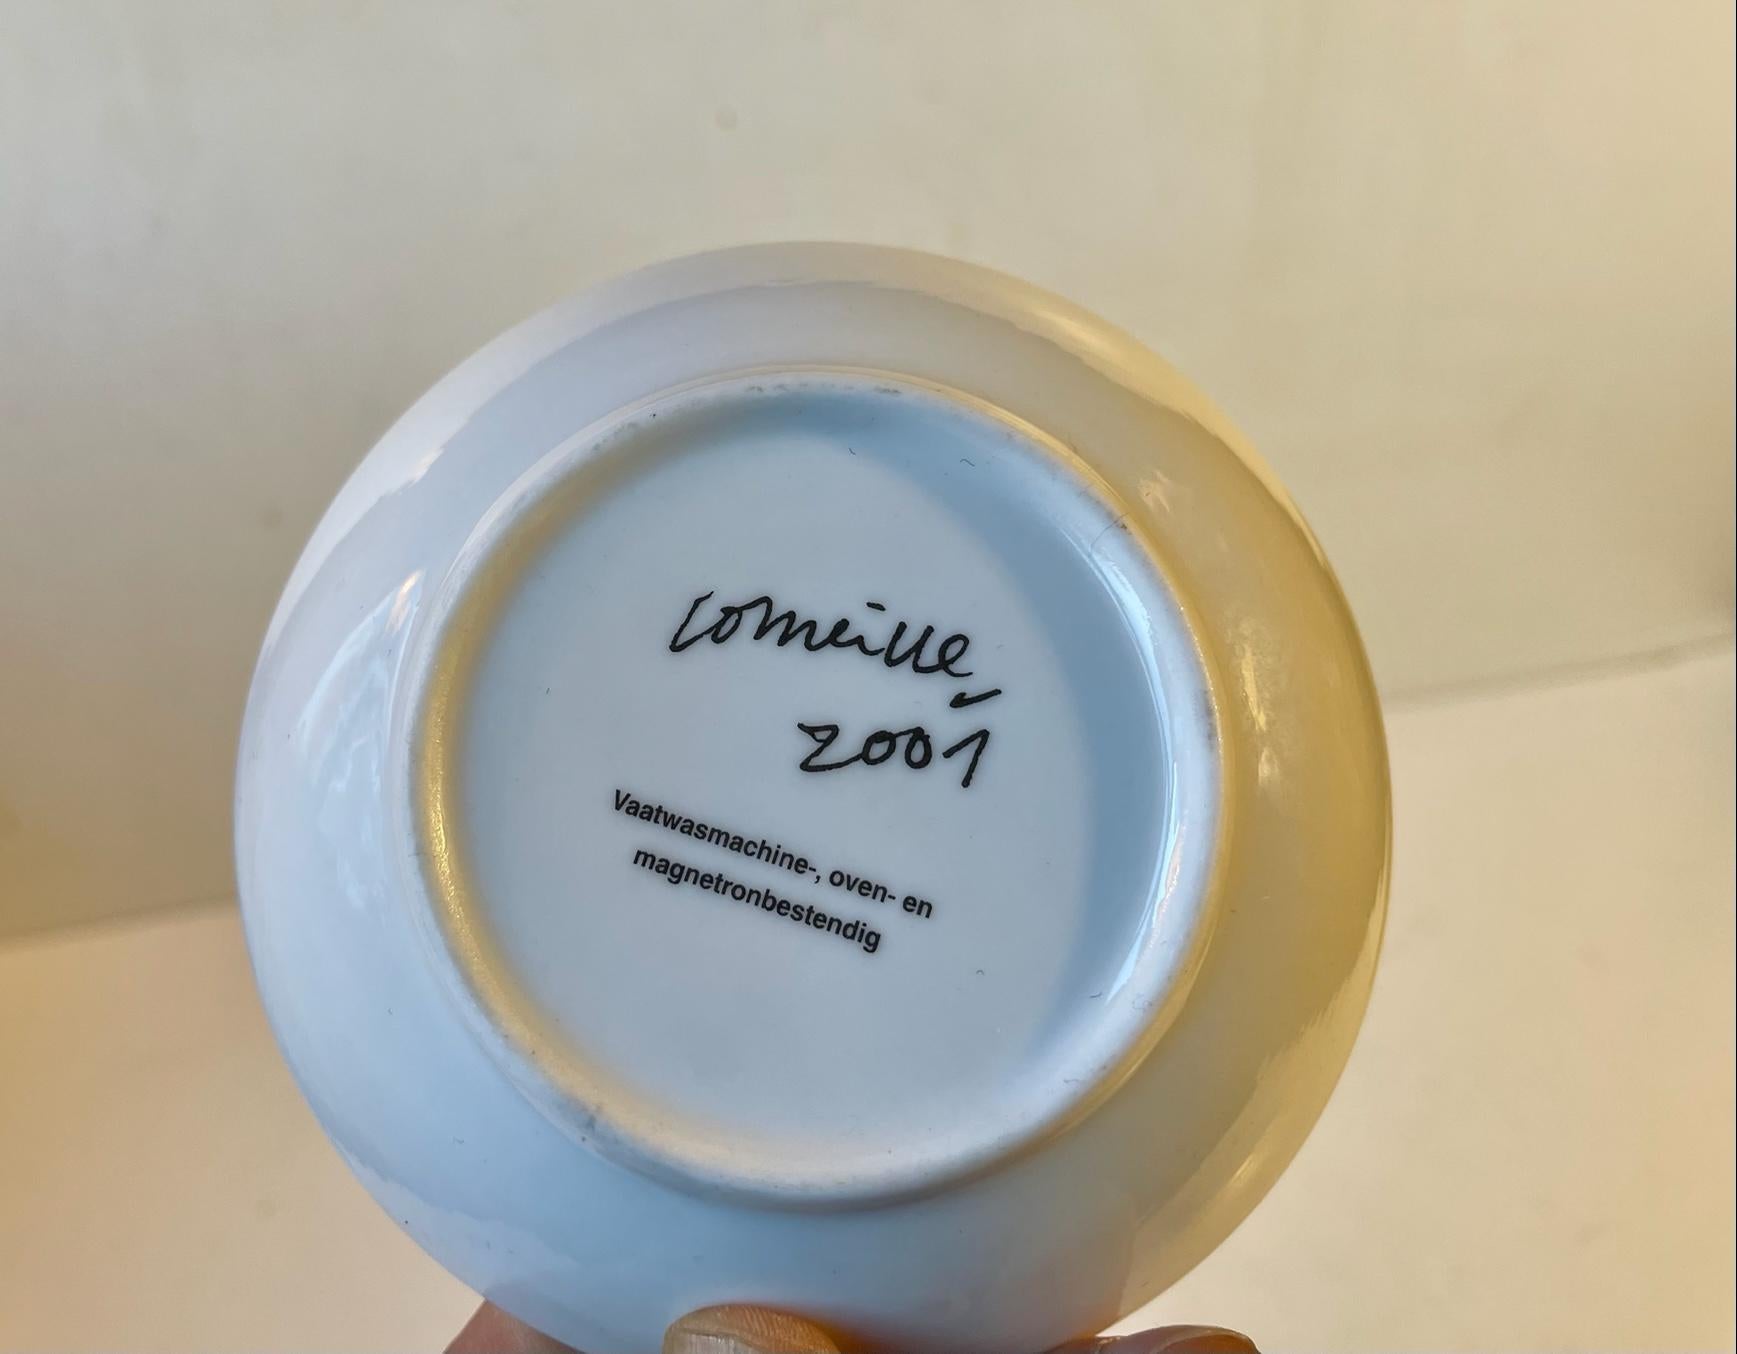 Corneille Small Artist Dish in Porcelain, 200 In Good Condition For Sale In Esbjerg, DK